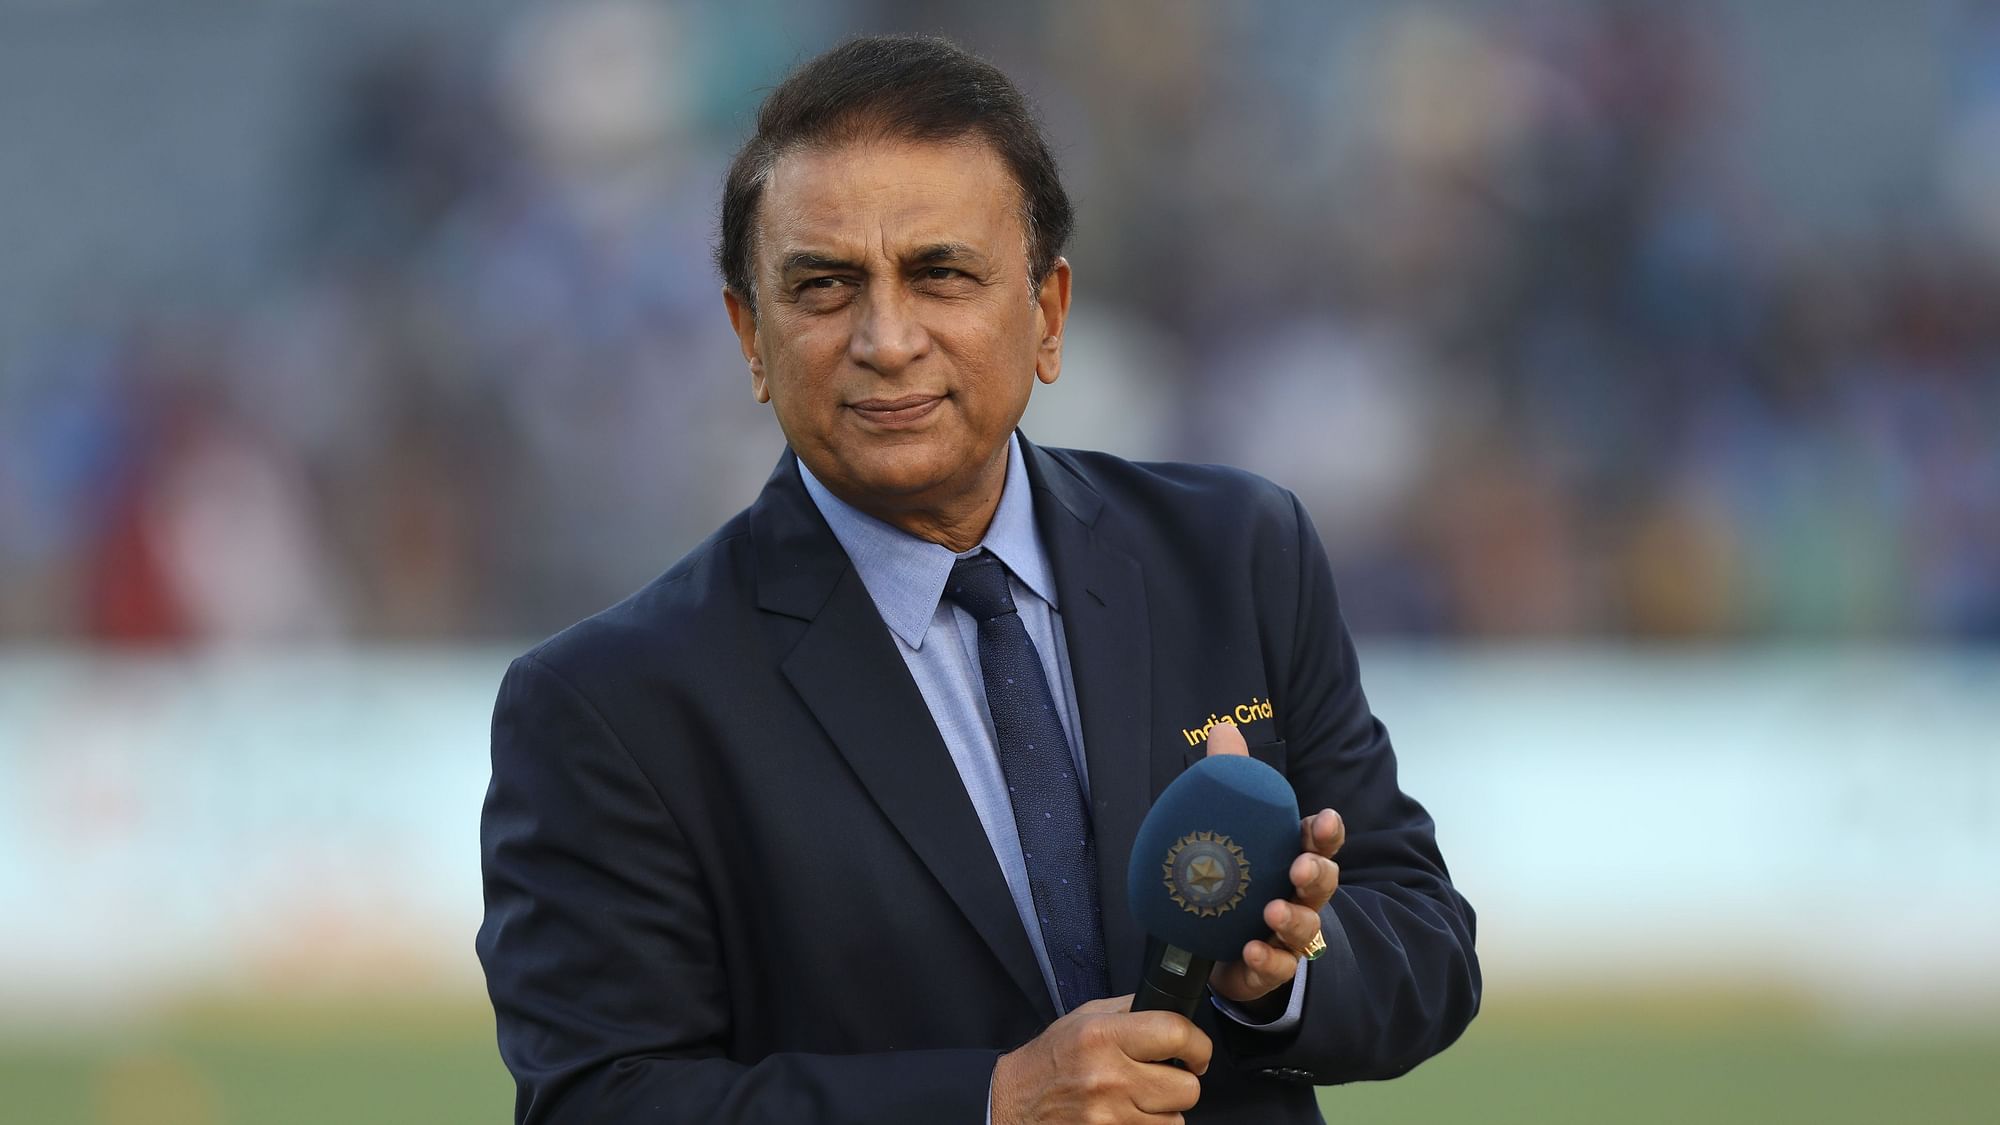 Sunil Gavaskar says ‘someone else is trying to make headlines’ but his conscience is clear.